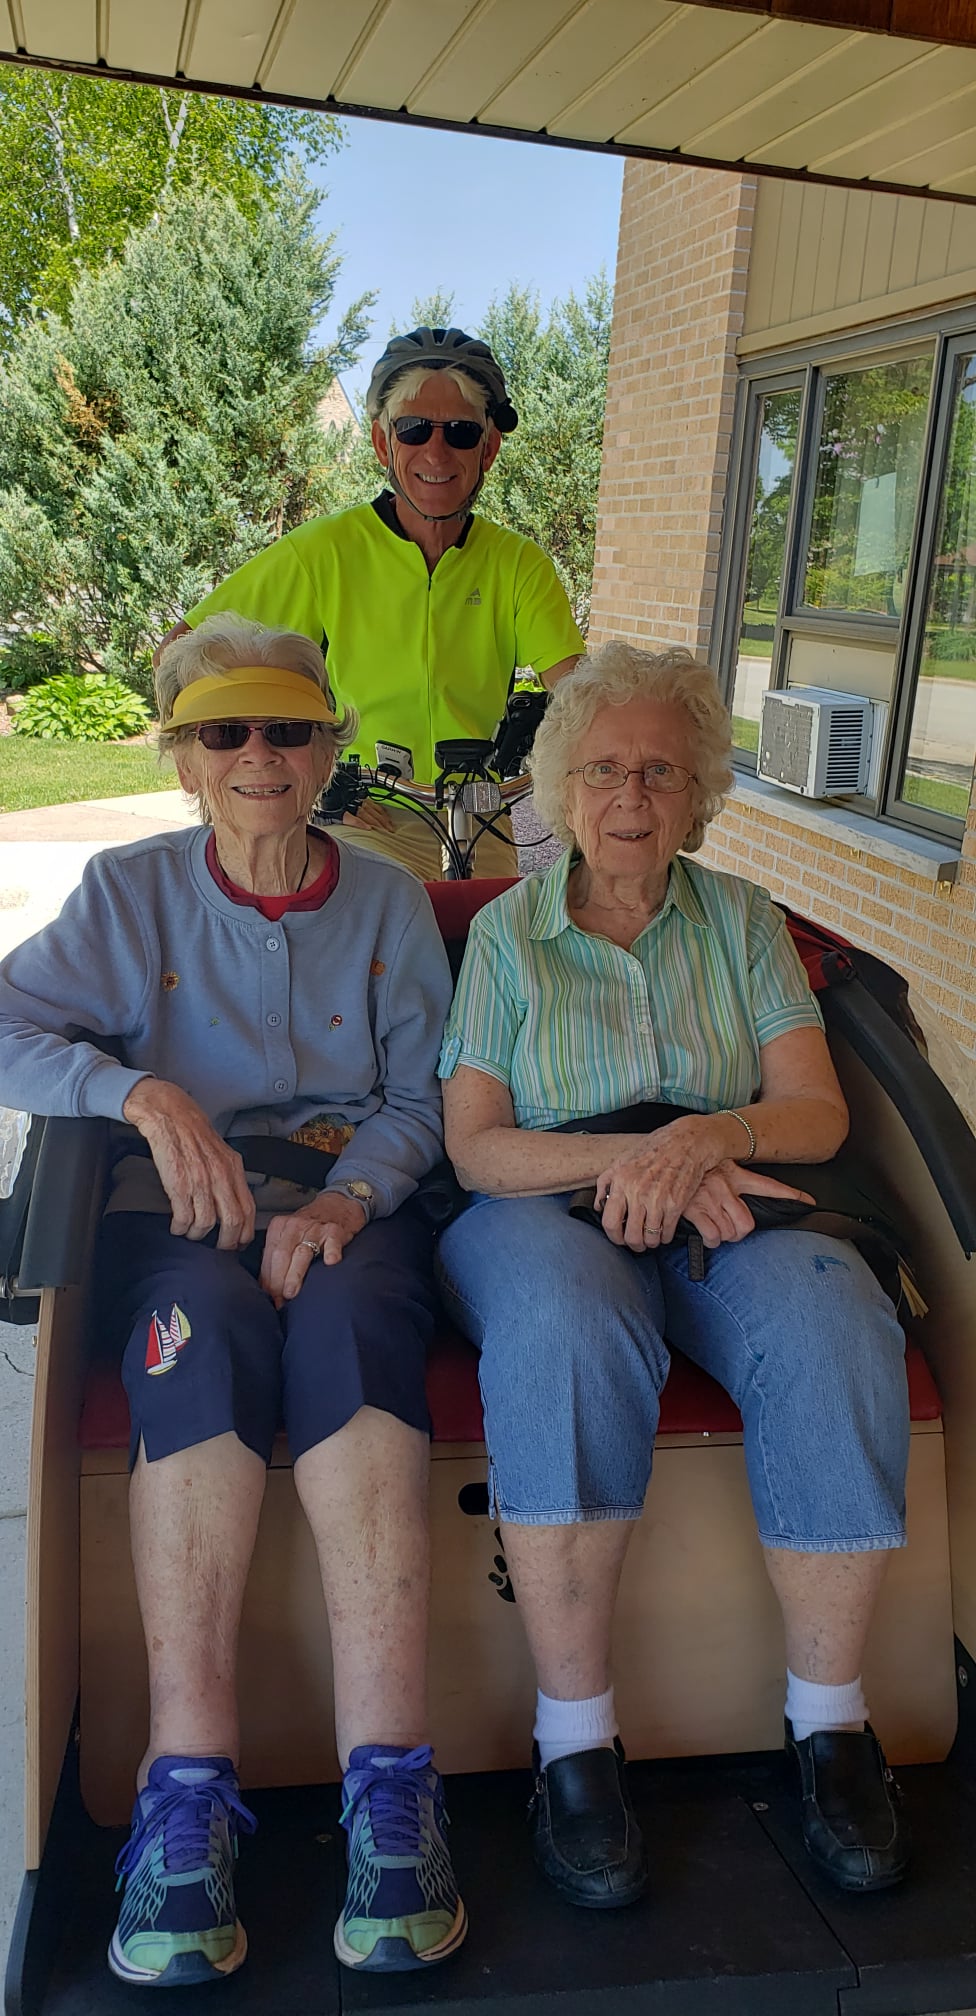 Pine Haven residents smiling with volunteer on a bicycle